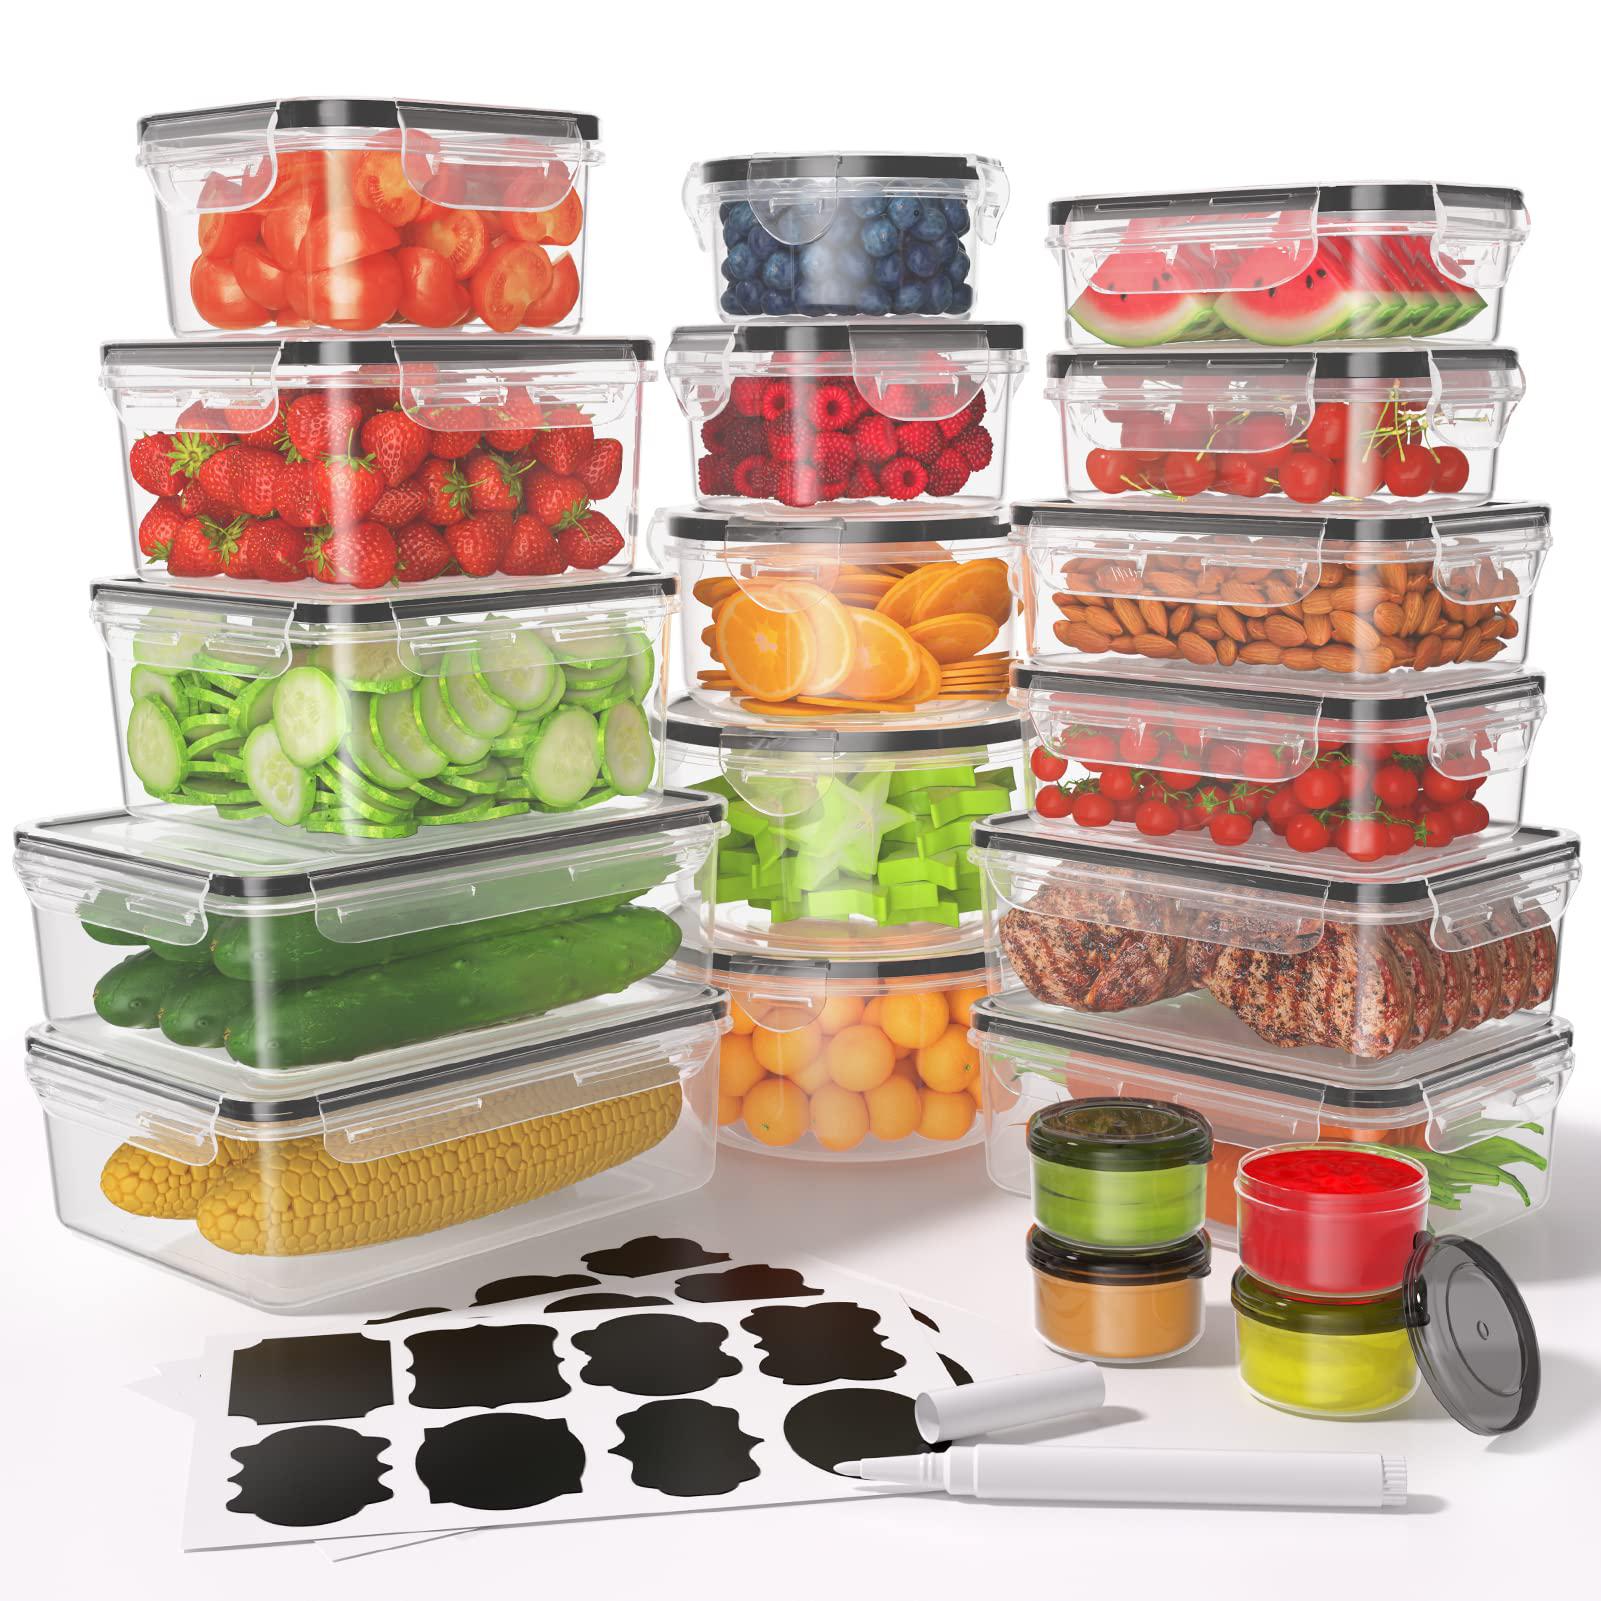 kemethy 40 pcs food storage containers with lids airtight (20 containers & 20 lids), plastic meal prep container for pantry &